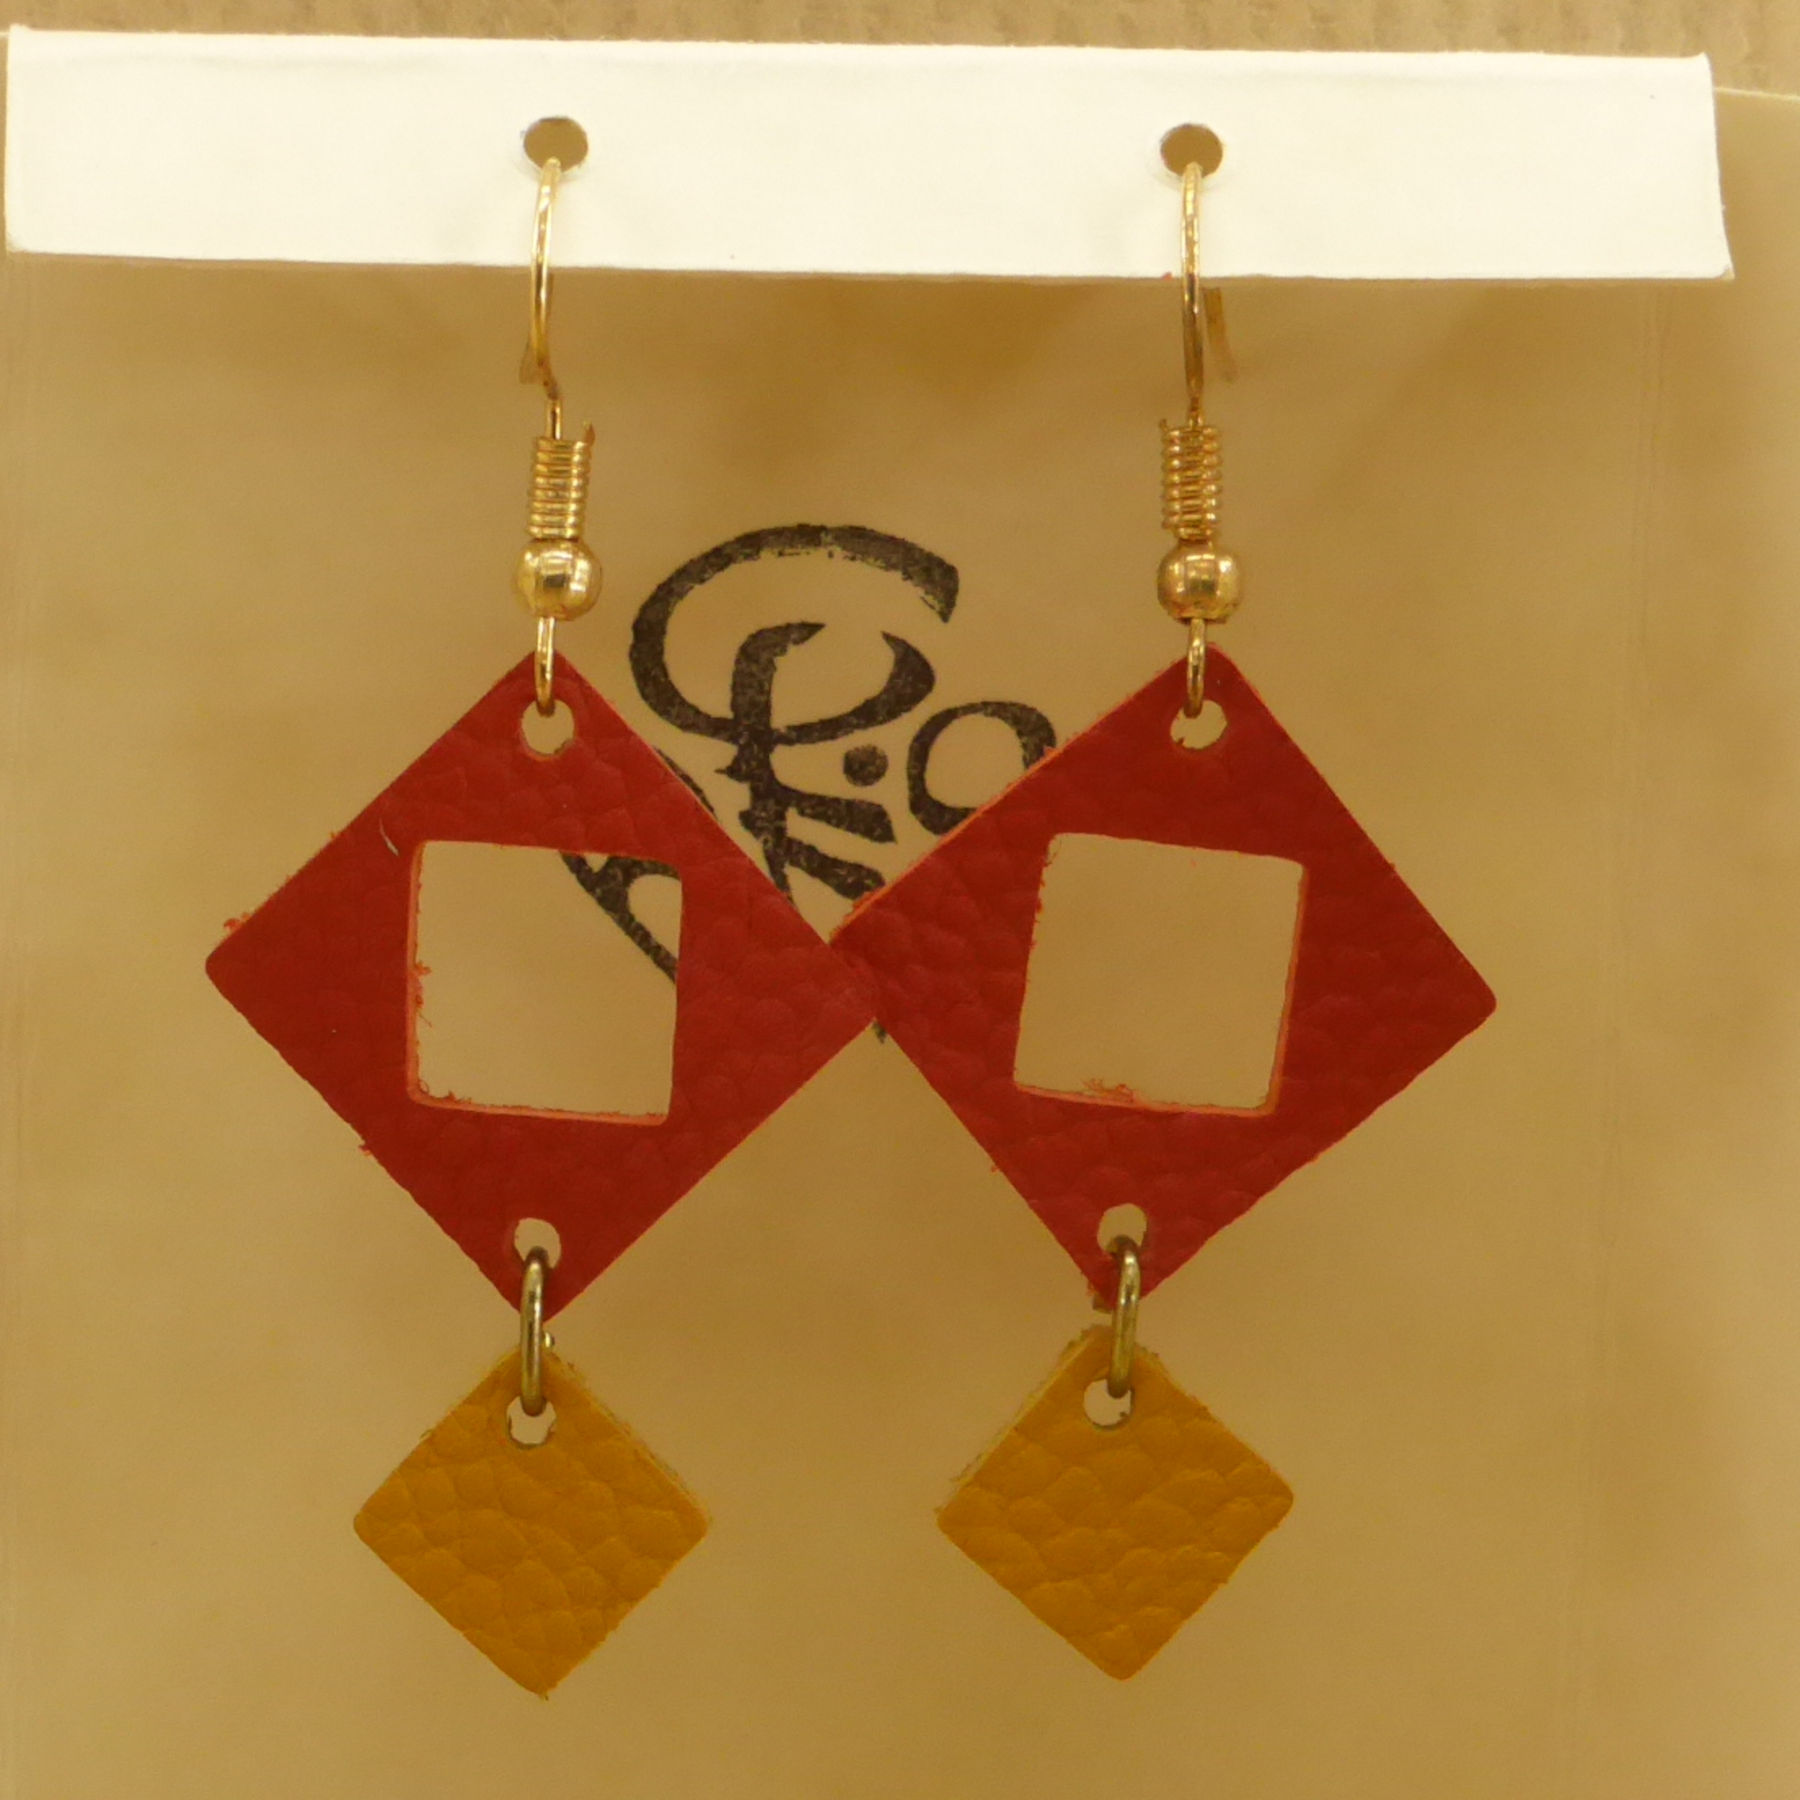 Contemporary red and fawn leather earrings, squares and diamonds